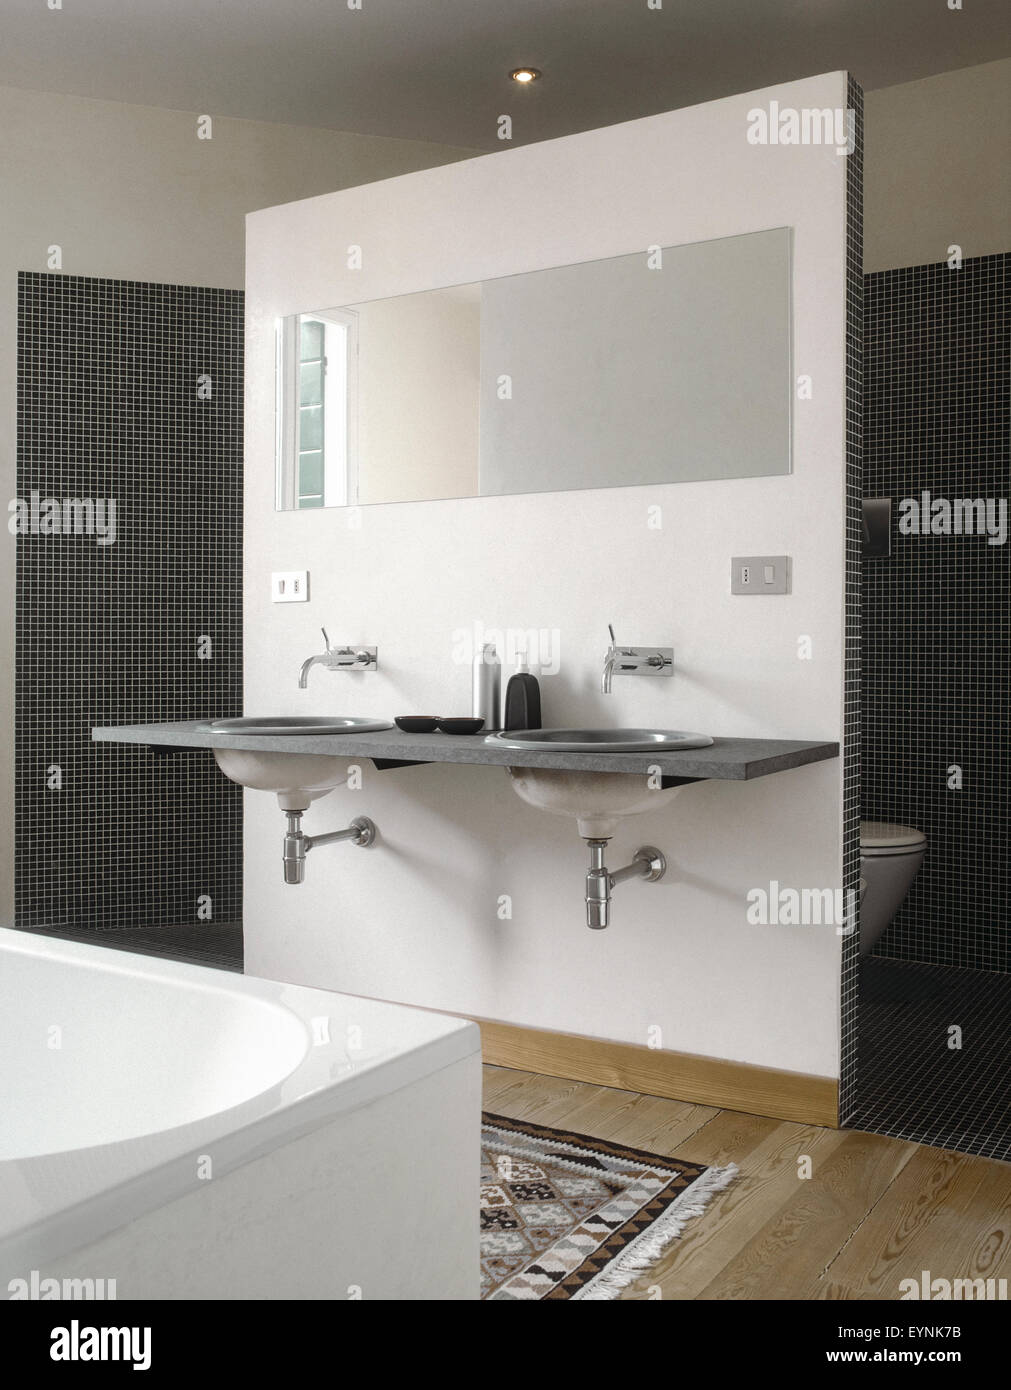 interior view of a modern bathroom in foreground the Vanity basin and mirror overlooking on sanitary ware Stock Photo